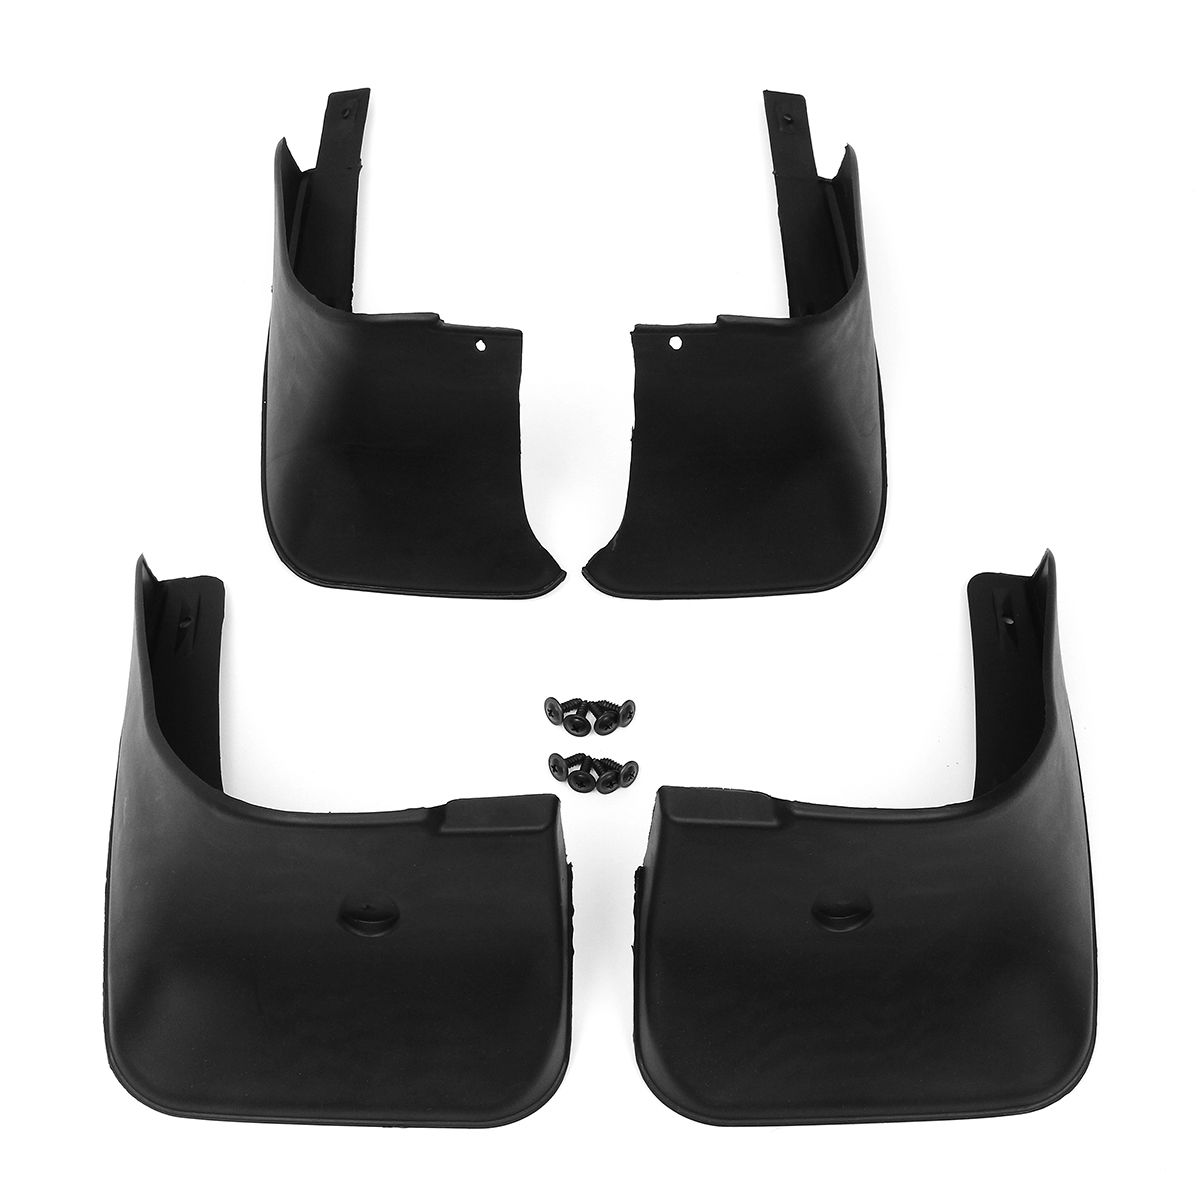 4Pcs-Front-And-Rear-Mud-Flaps-Car-Mudguards-For-Toyota-Corolla-Altis-E140-2007-2013-1389173